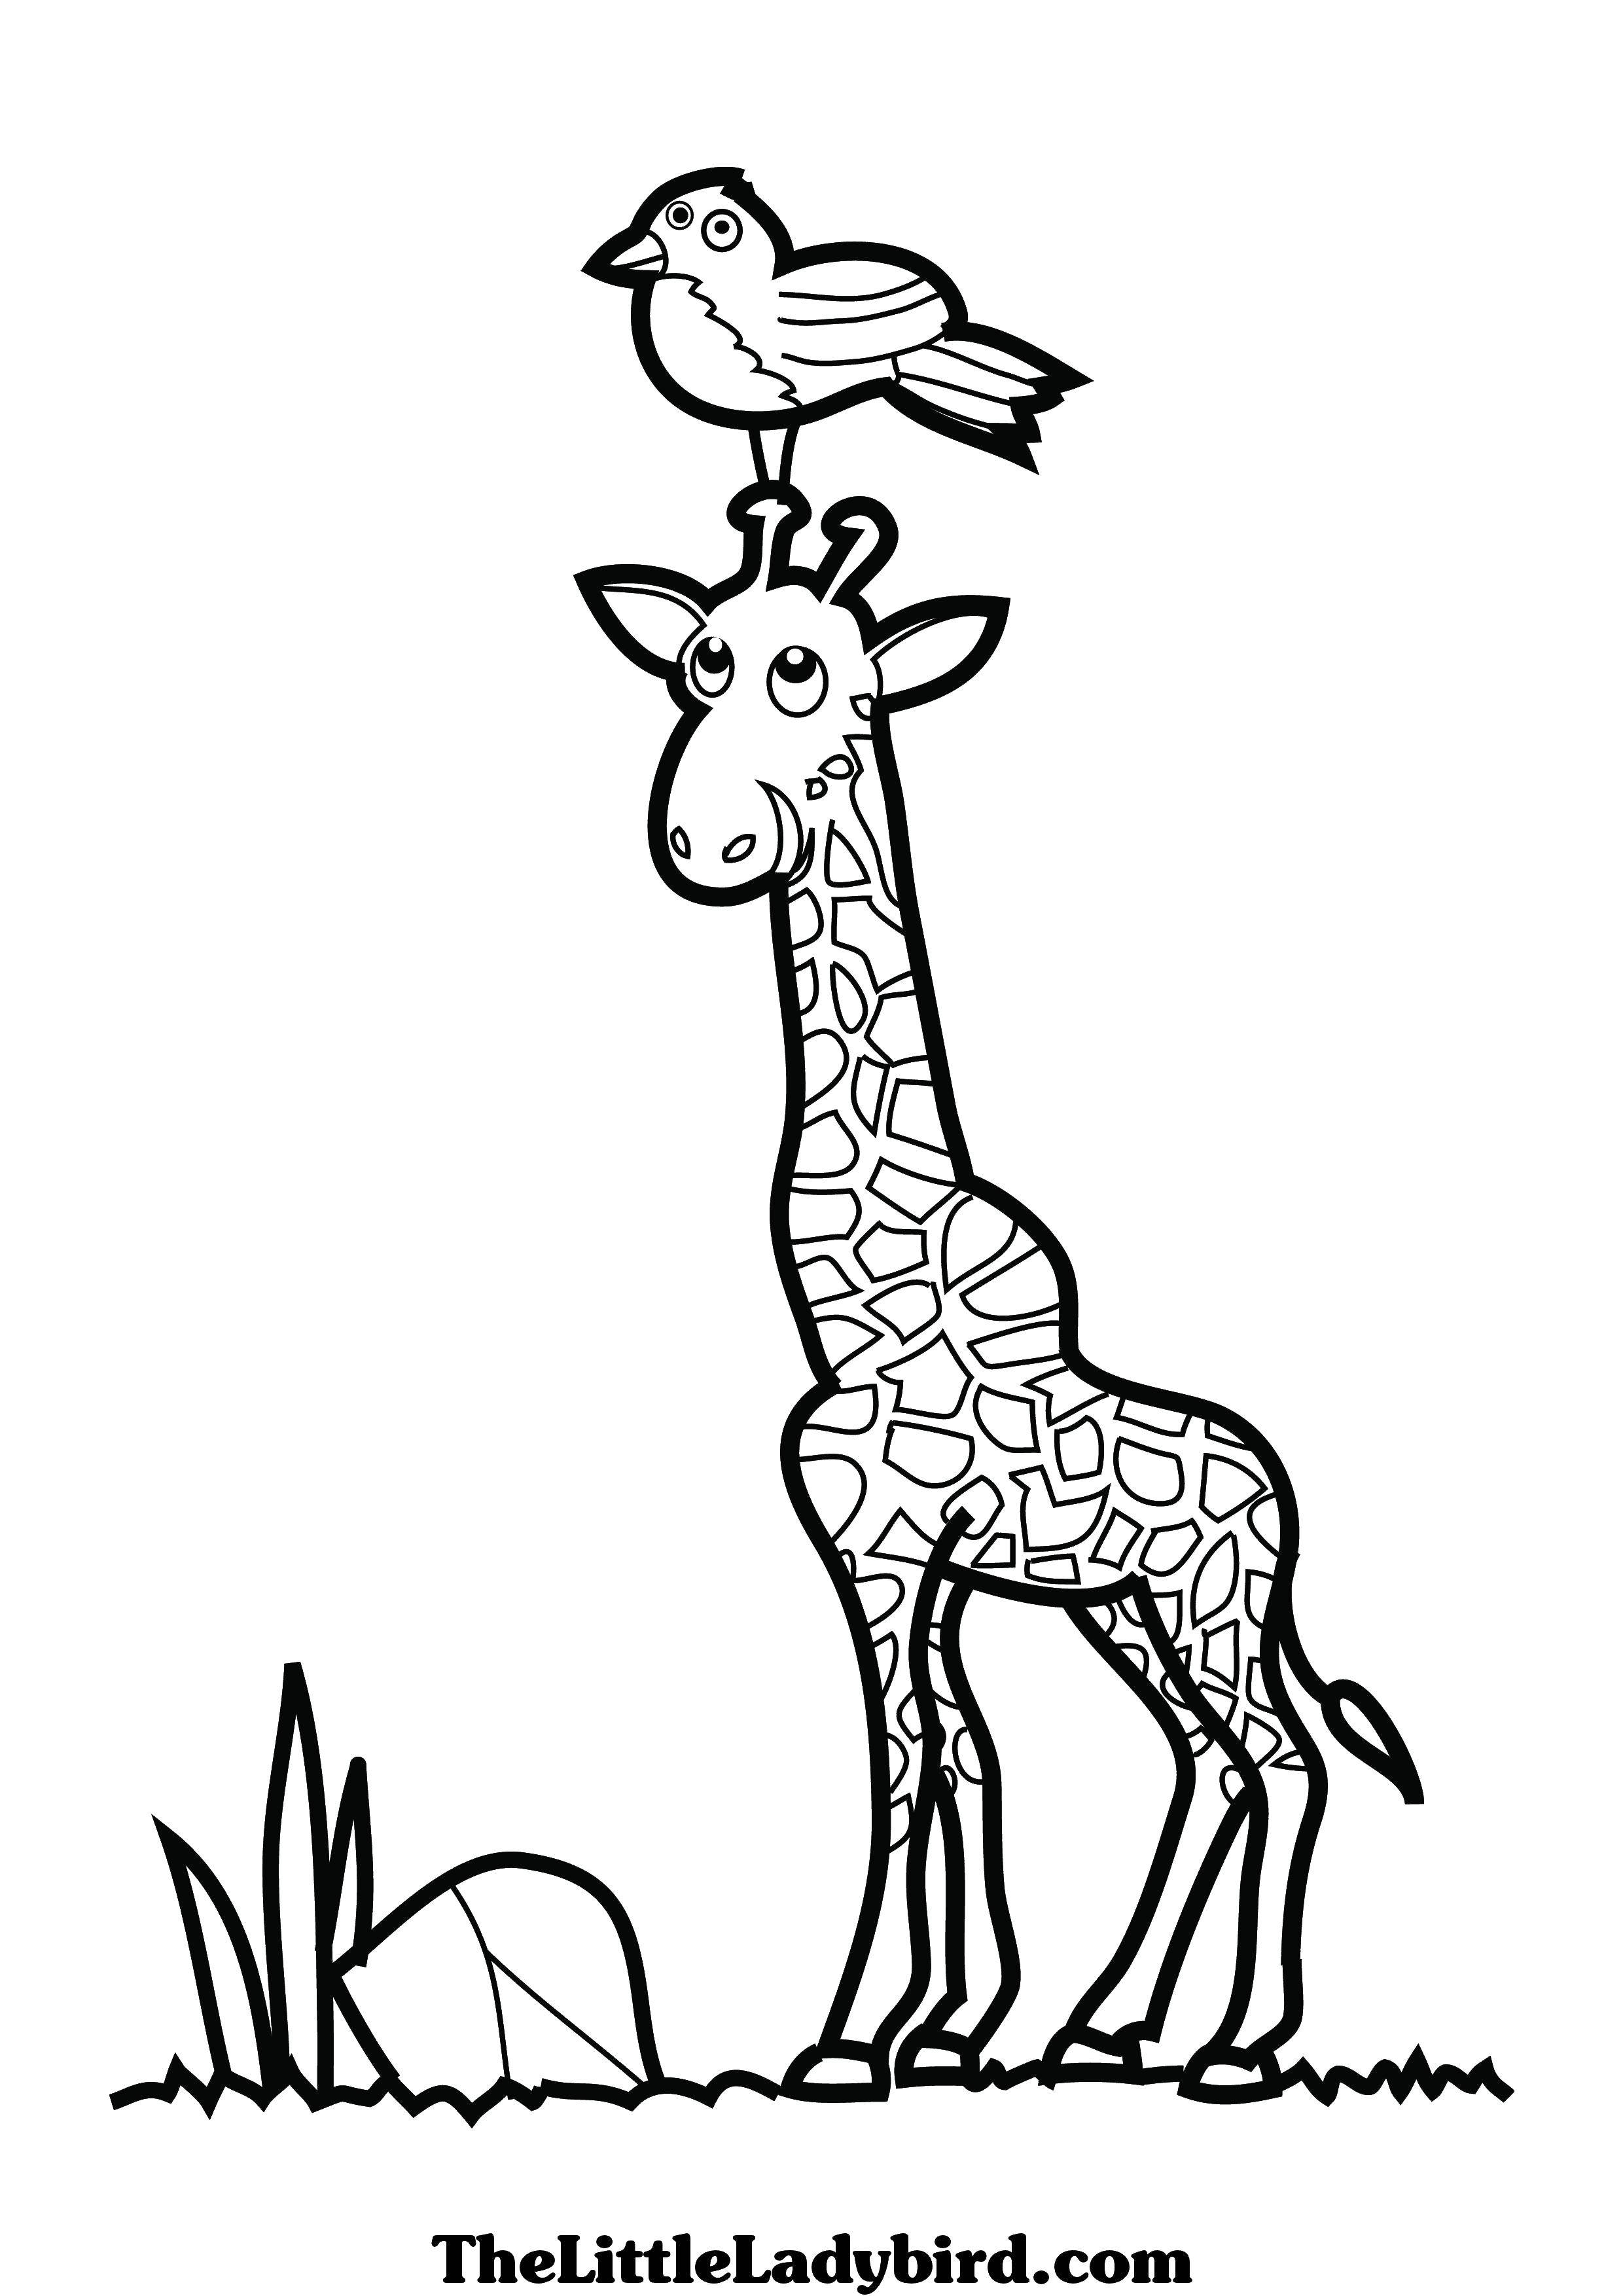 Coloring A bird perched on grafica. Category Animals. Tags:  Animals, giraffe.